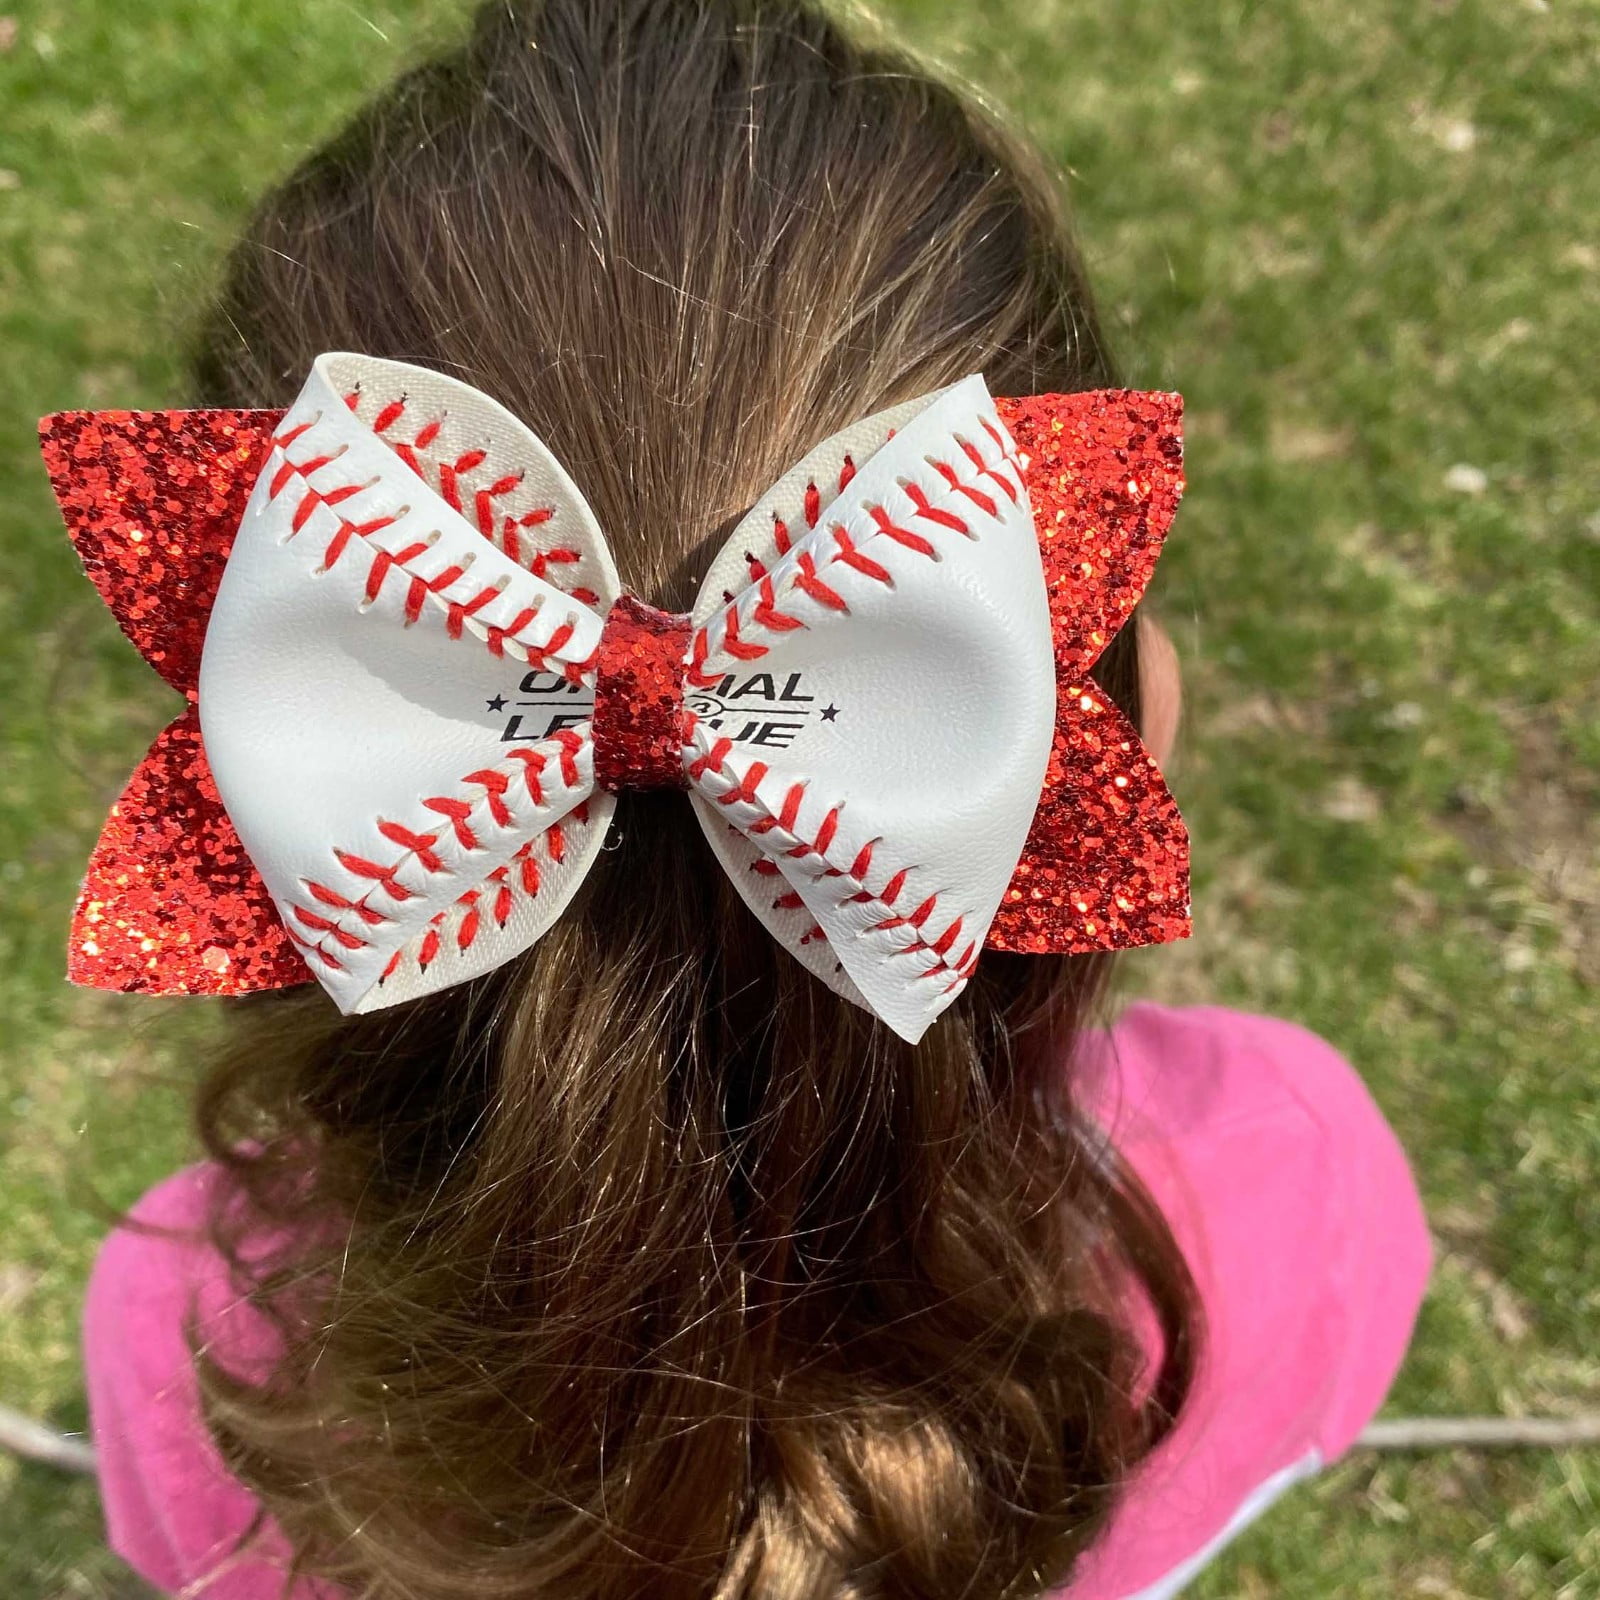 How to Wear Hair Bows 2023: 12 Unique & Cute Ribbon Styles – StyleCaster